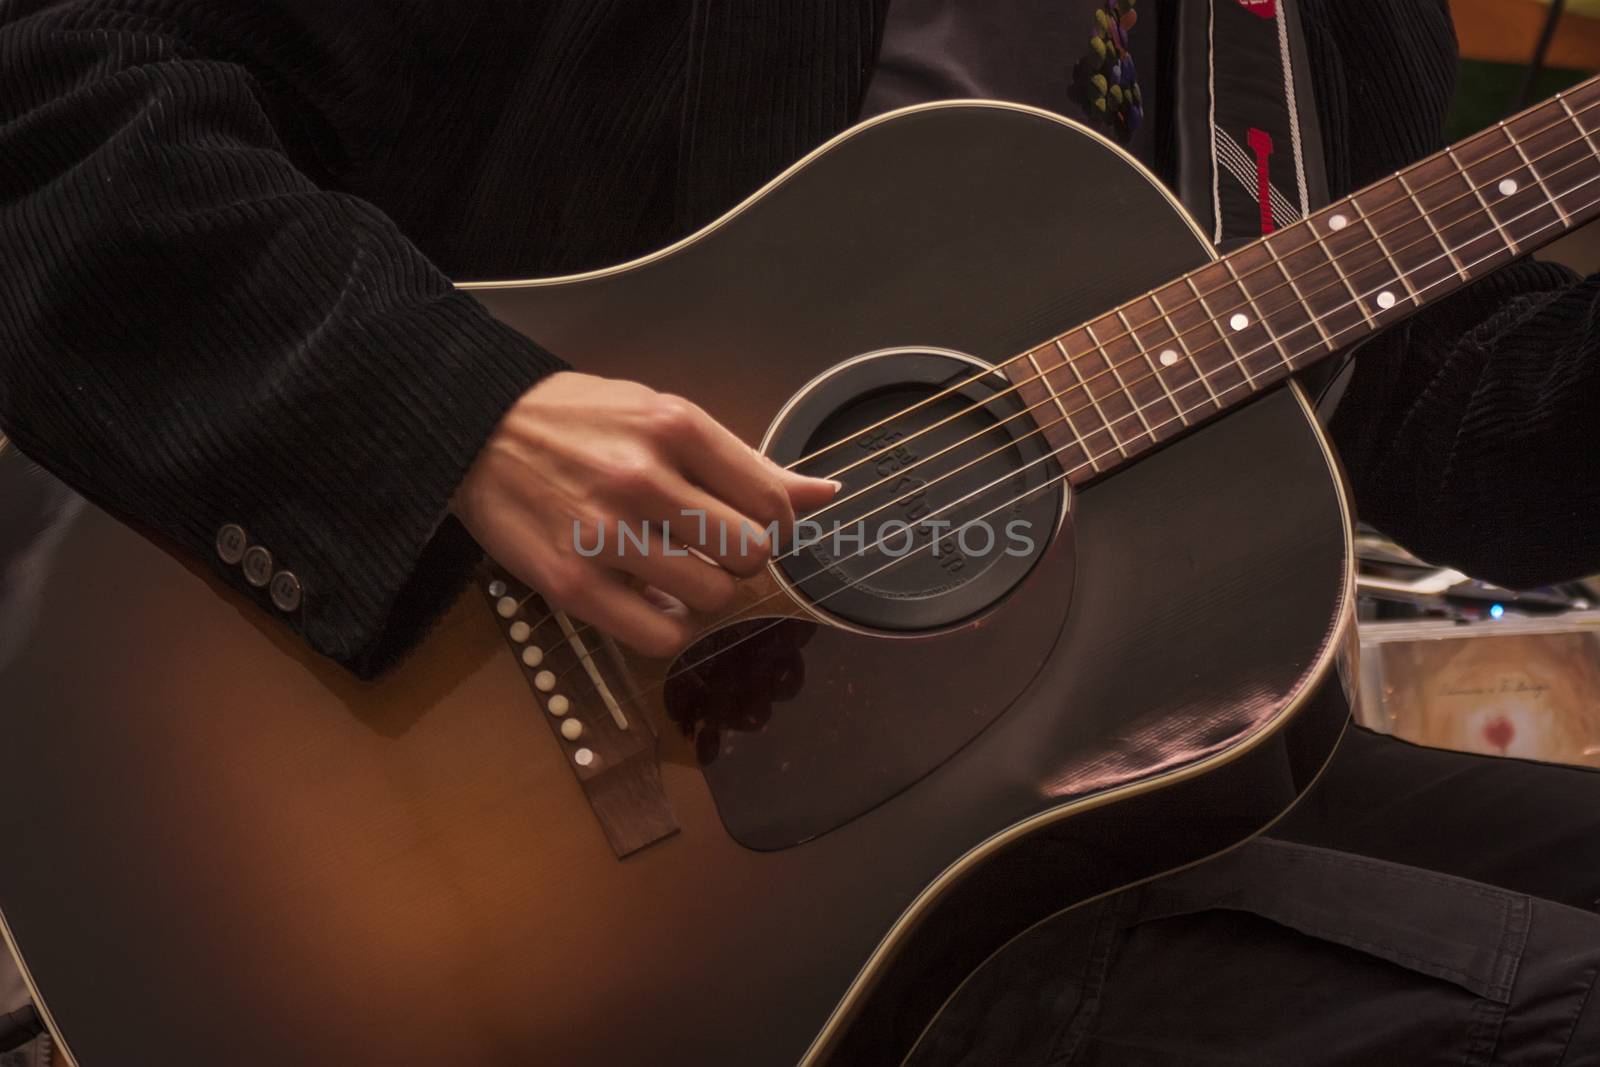 Only a traditional guitar. by pippocarlot